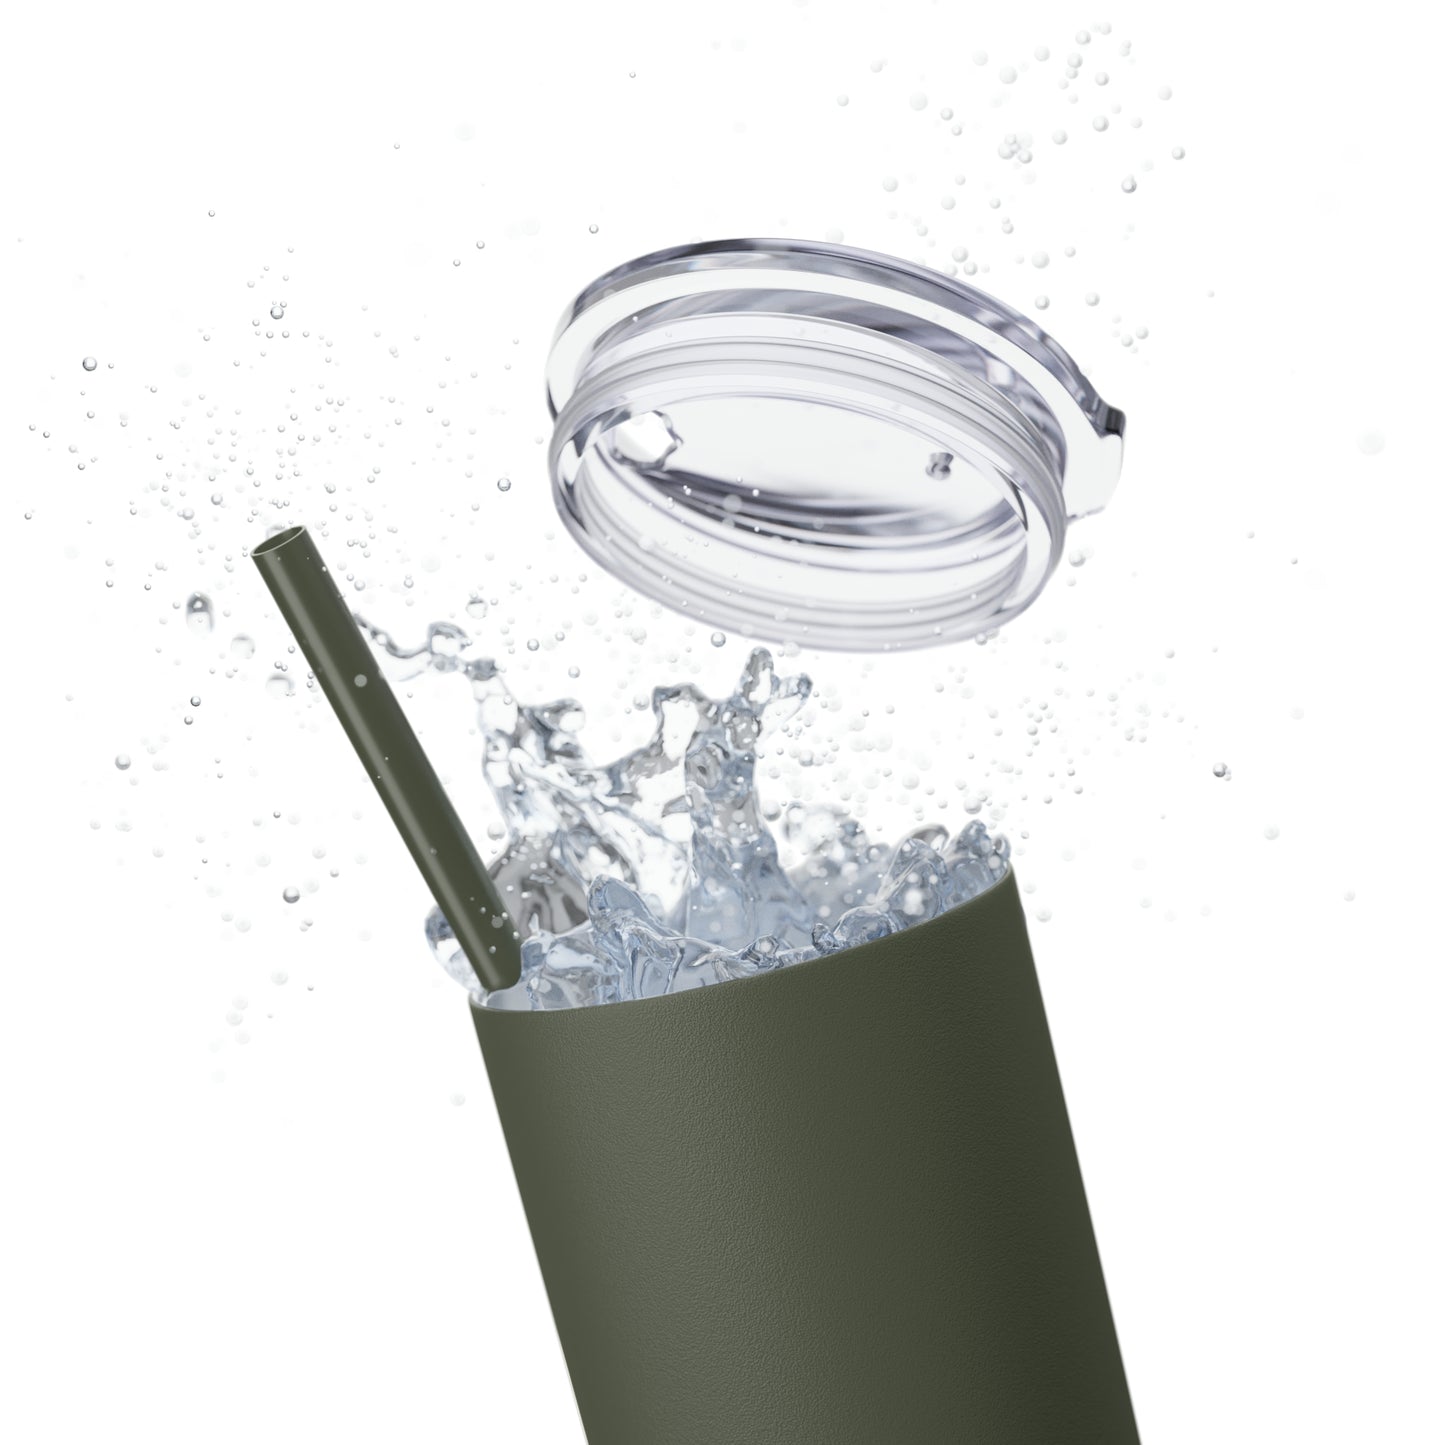 Can We Not With The Guns - Skinny Tumbler with Straw, 20oz